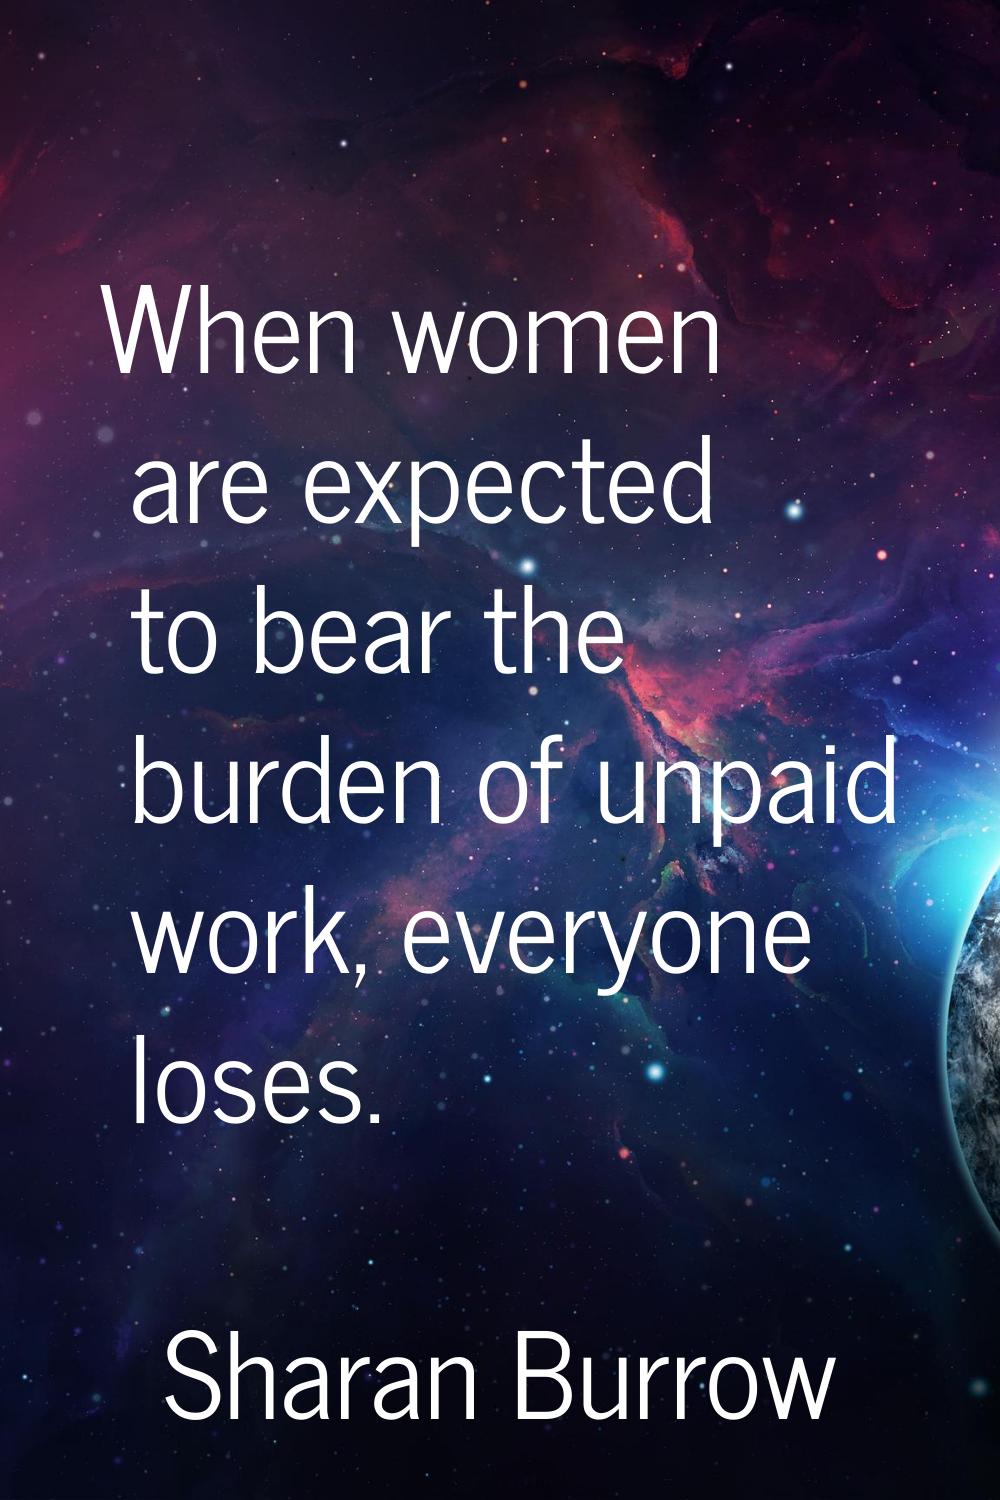 When women are expected to bear the burden of unpaid work, everyone loses.